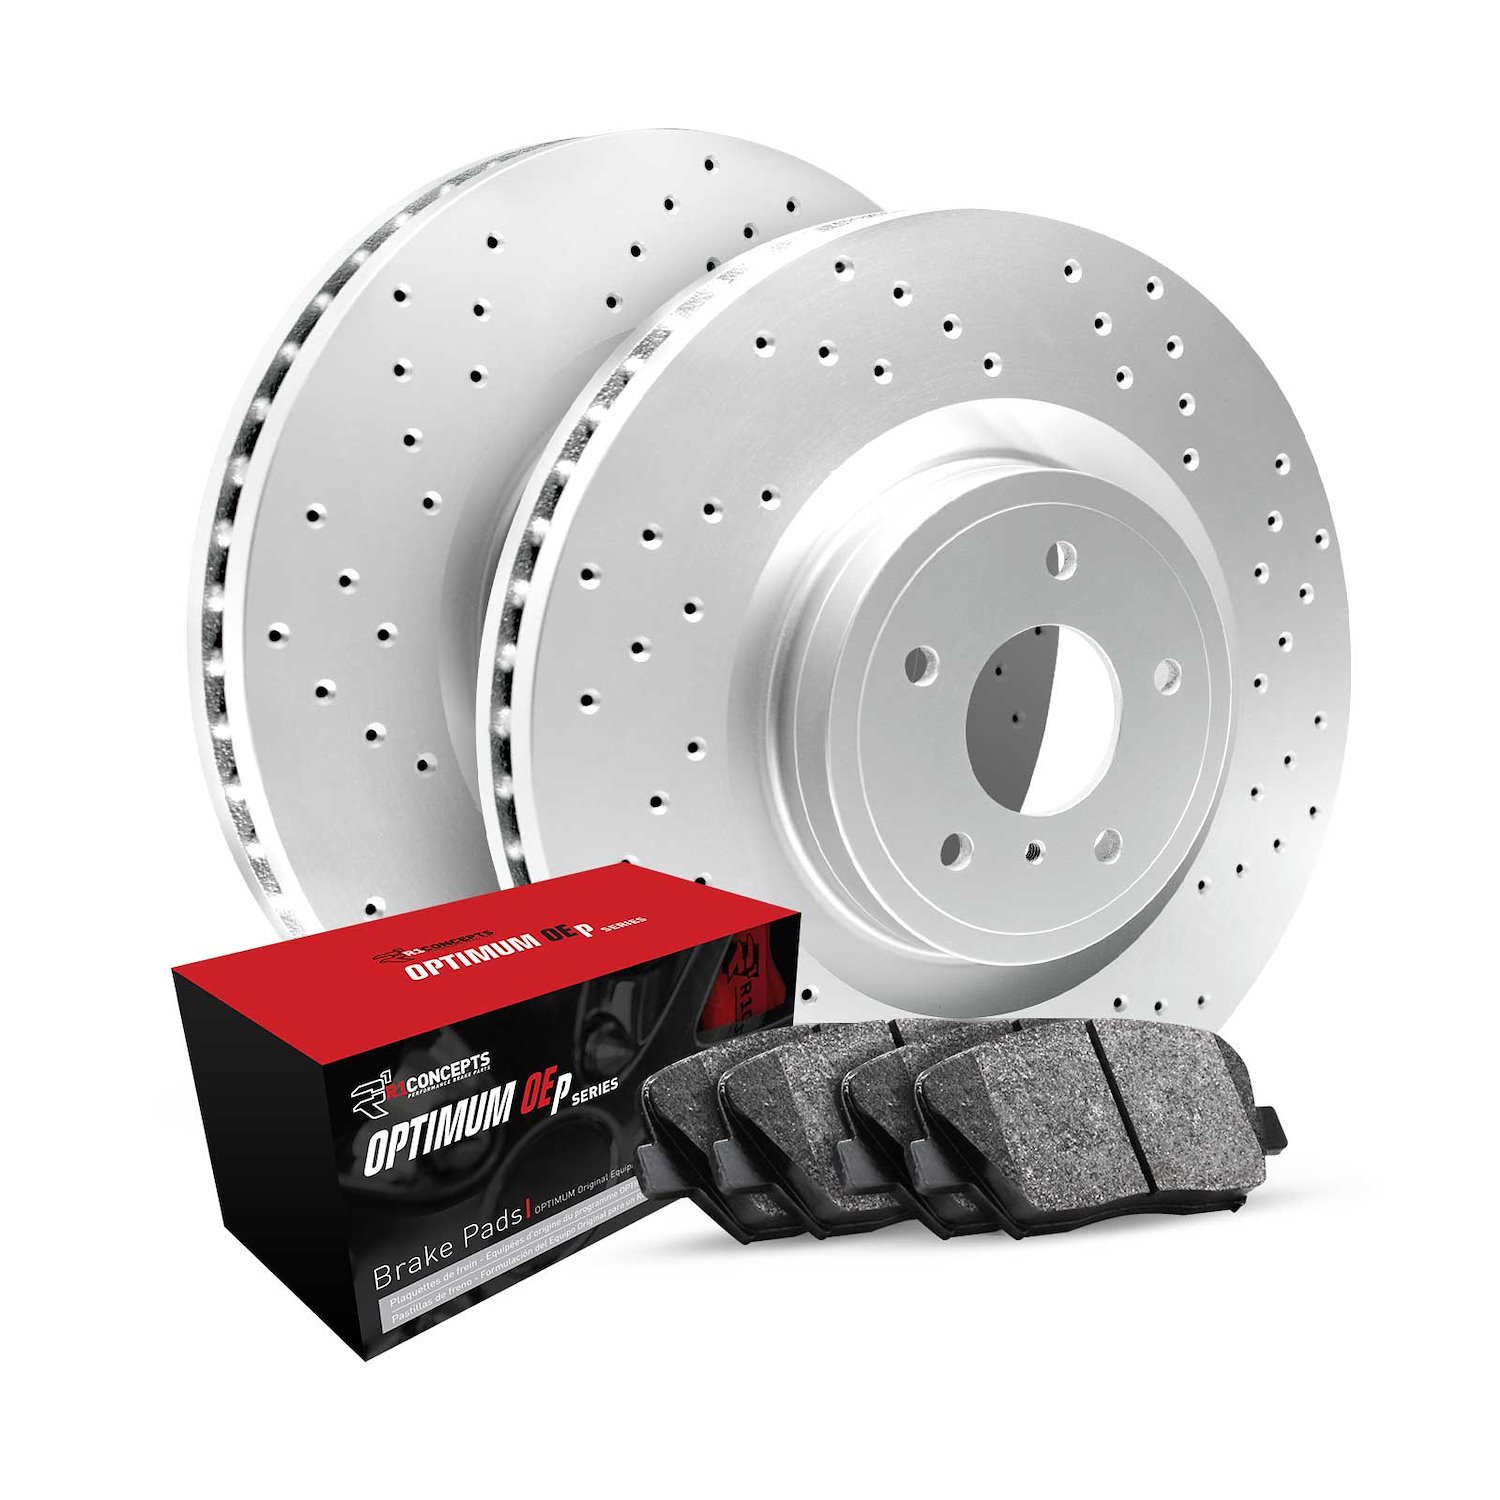 GEO-Carbon Drilled Brake Rotor Set w/Optimum OE Pads, Fits Select Fits Multiple Makes/Models, Position: Front